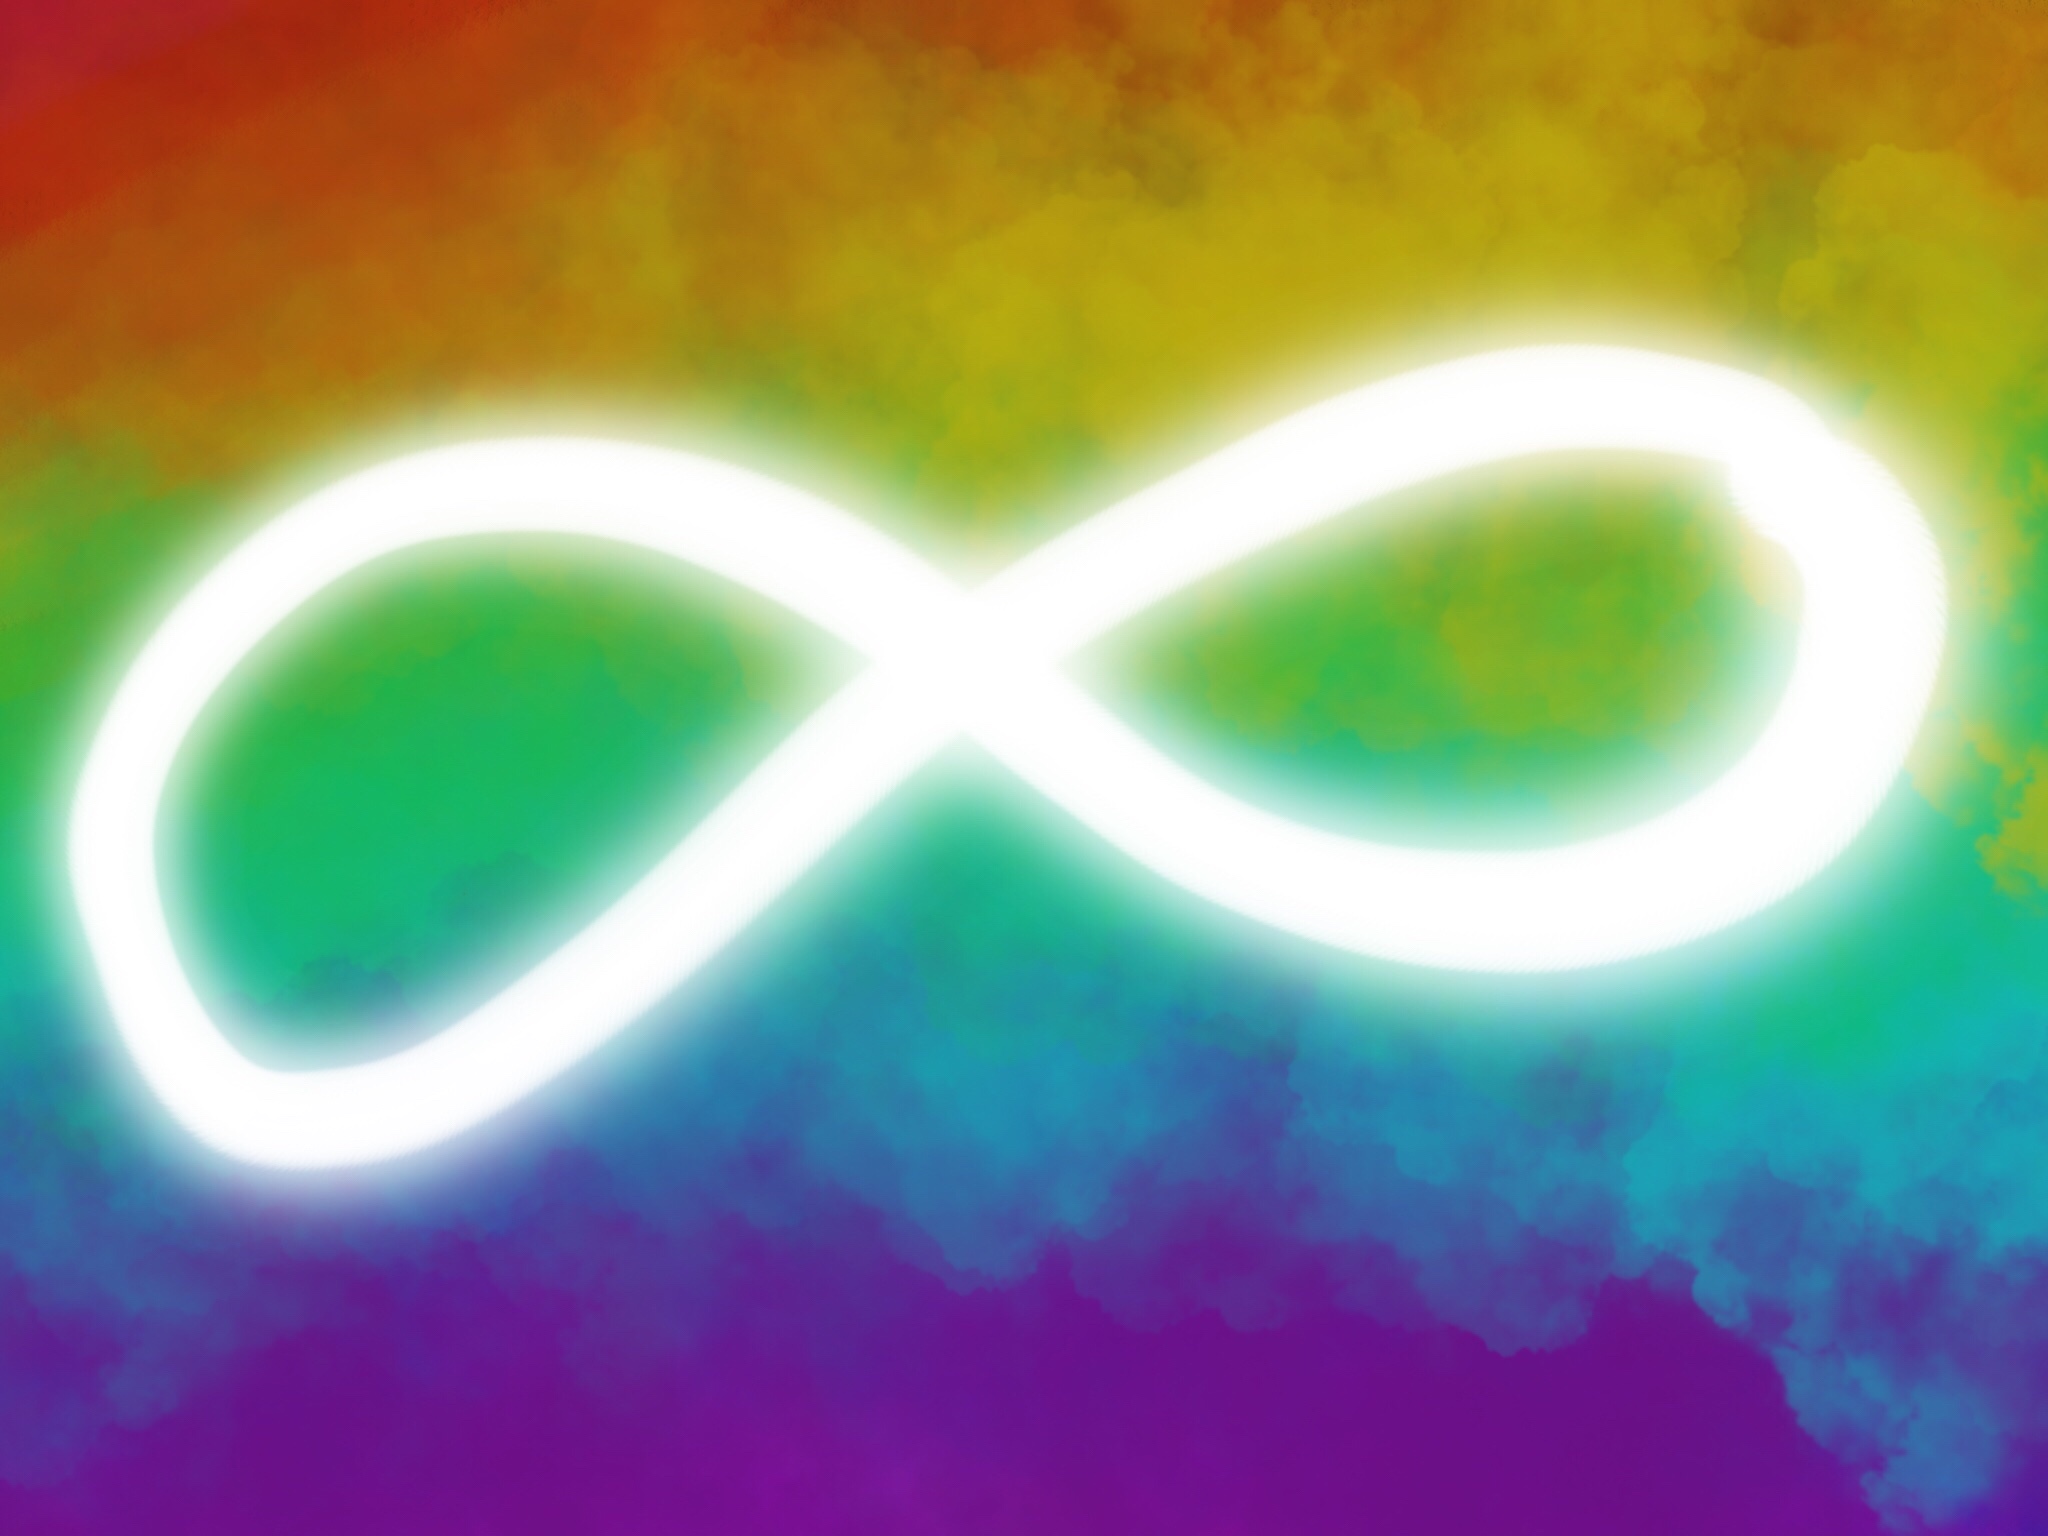 Bright white infinity symbol on a rainbow background with cloud effect